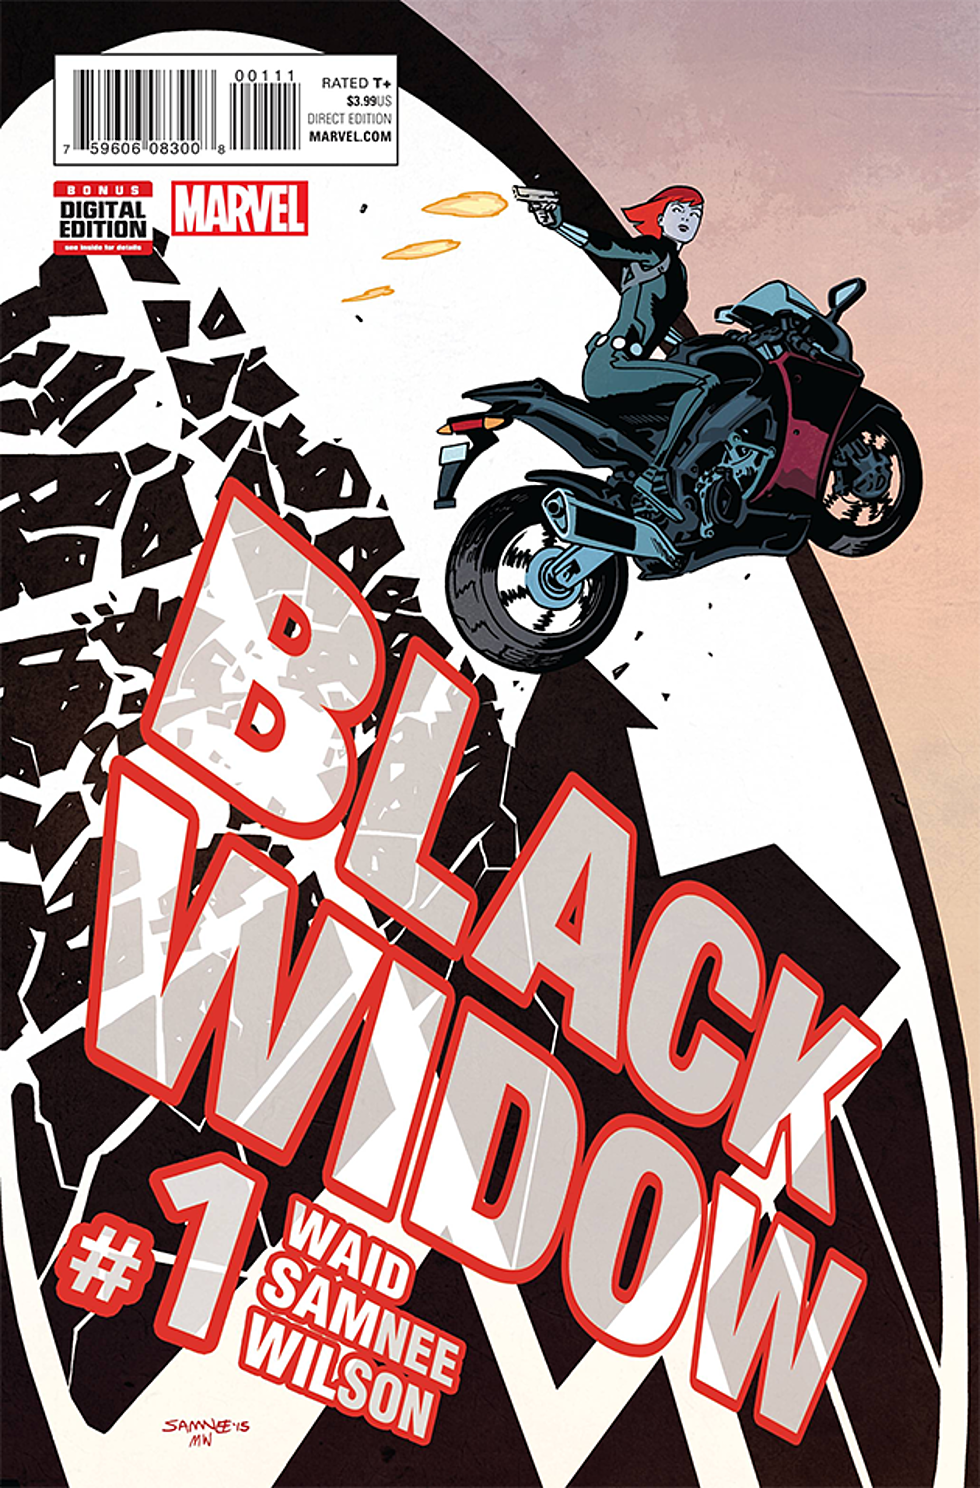 The Chase Is On In Waid, Samnee &#038; Wilson&#8217;s &#8216;Black Widow&#8217; #1 [Review]